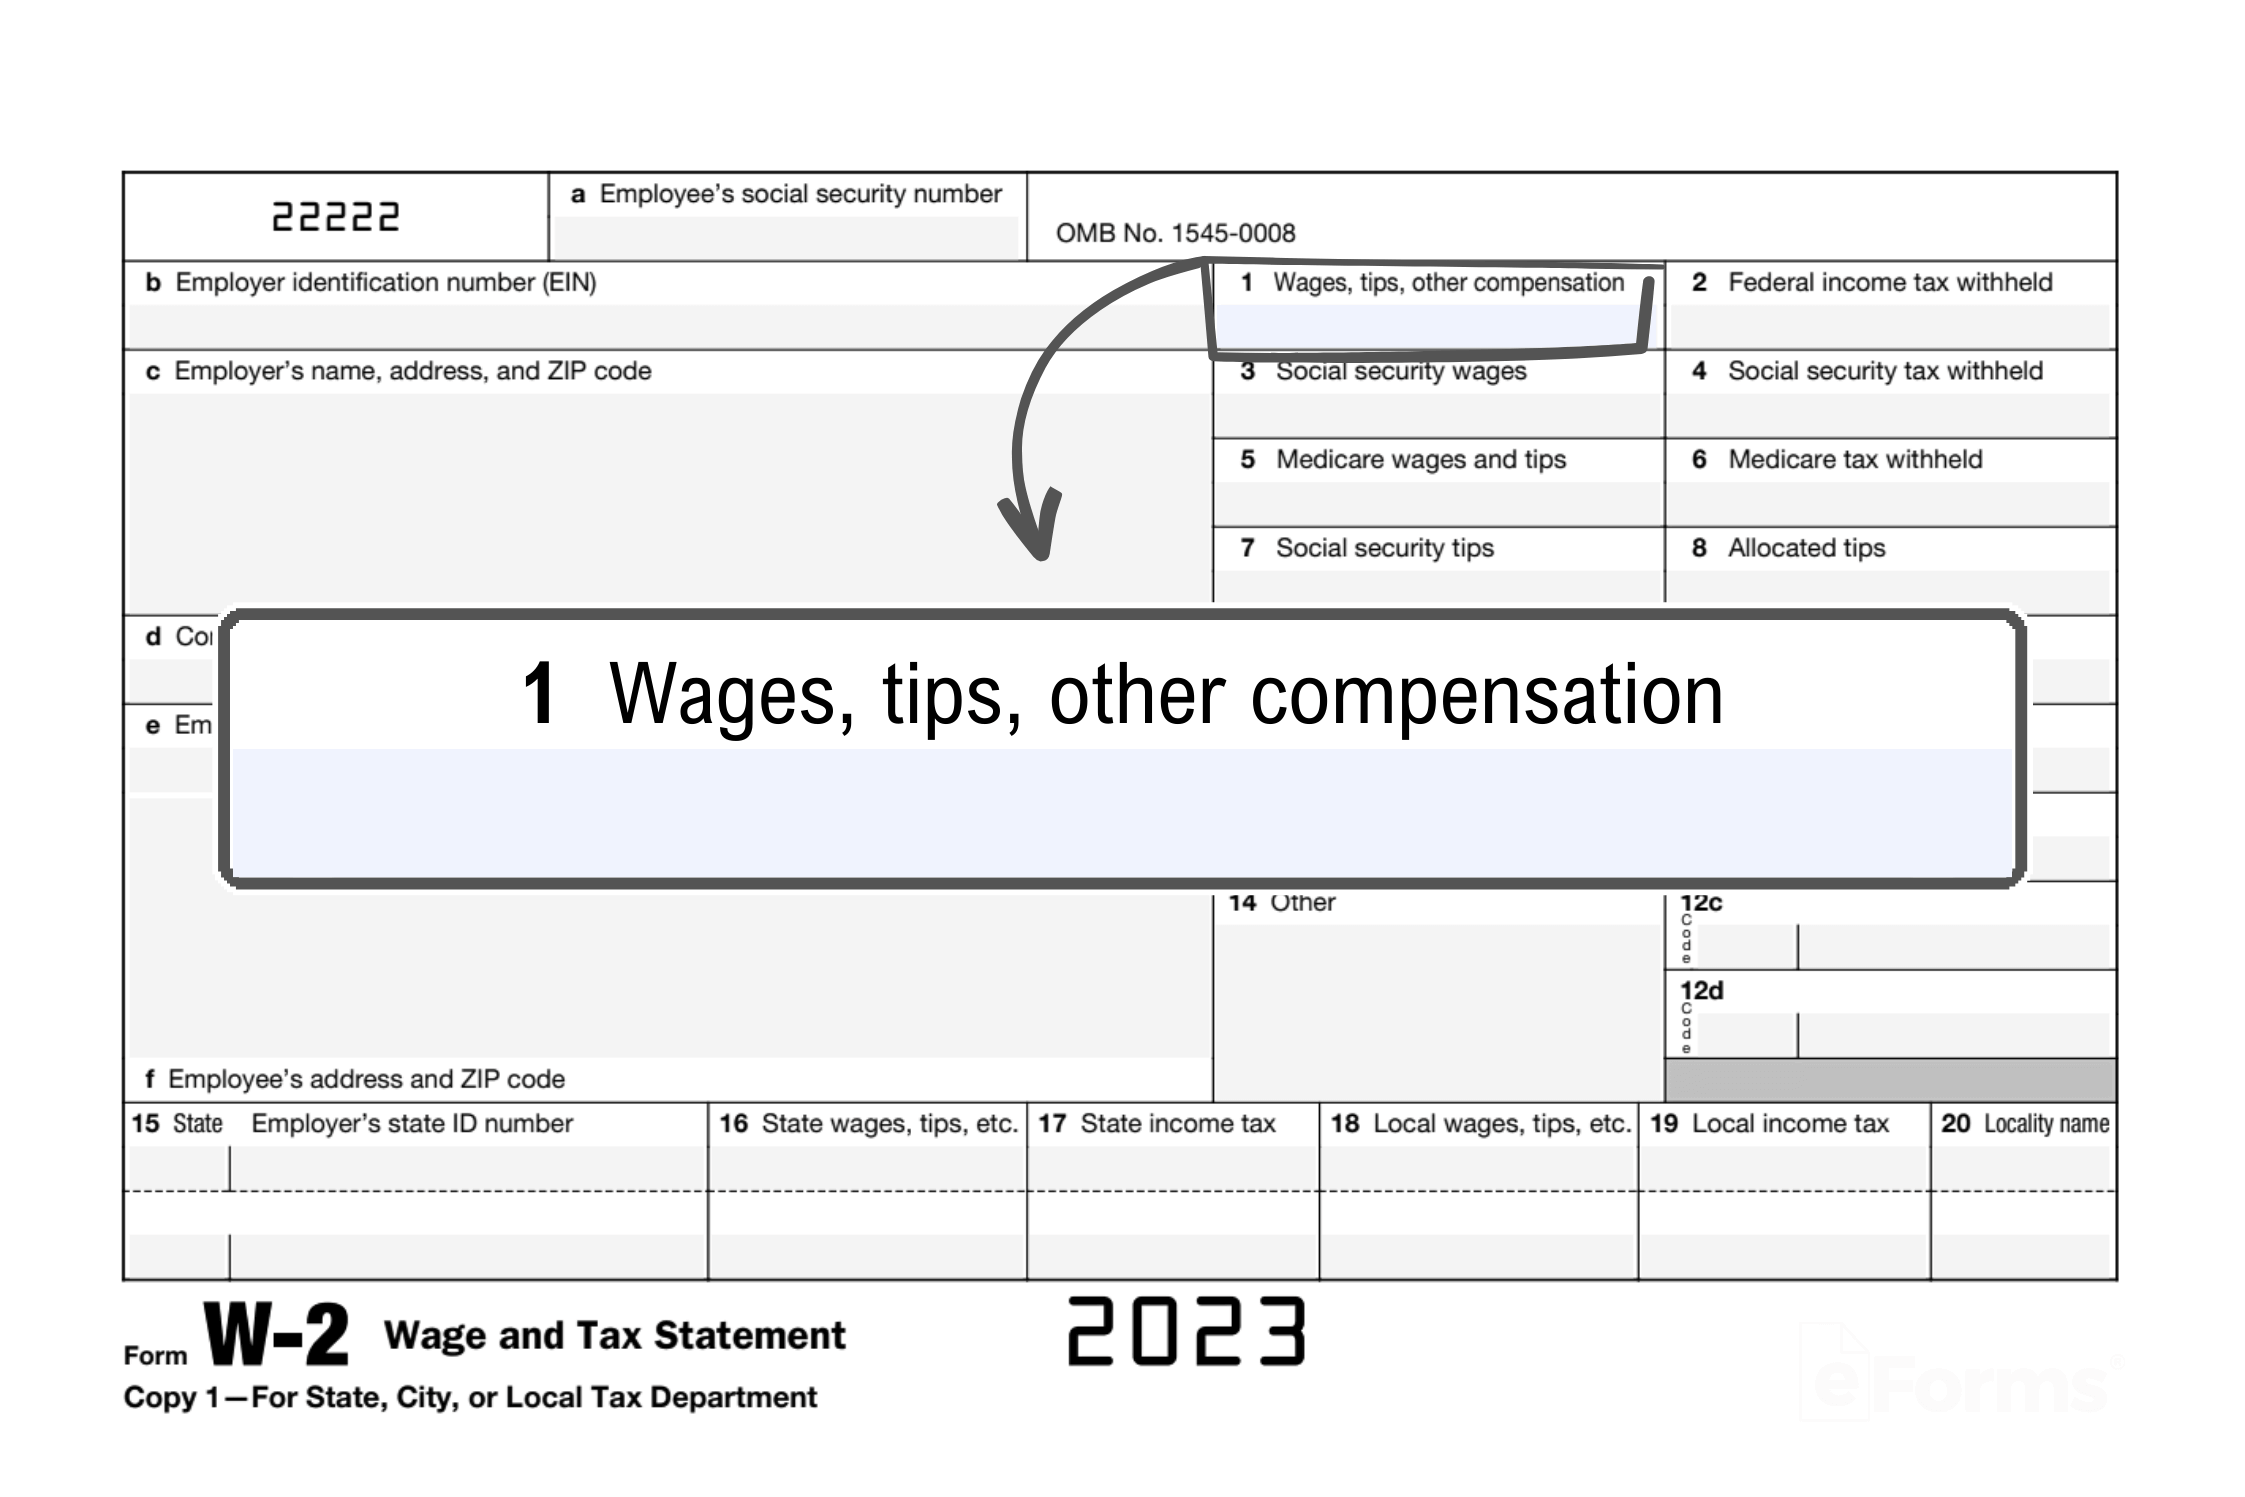 Free Irs Form W-2 | Wage And Tax Statement - Pdf – Eforms regarding Can I Print My Own W2 Forms